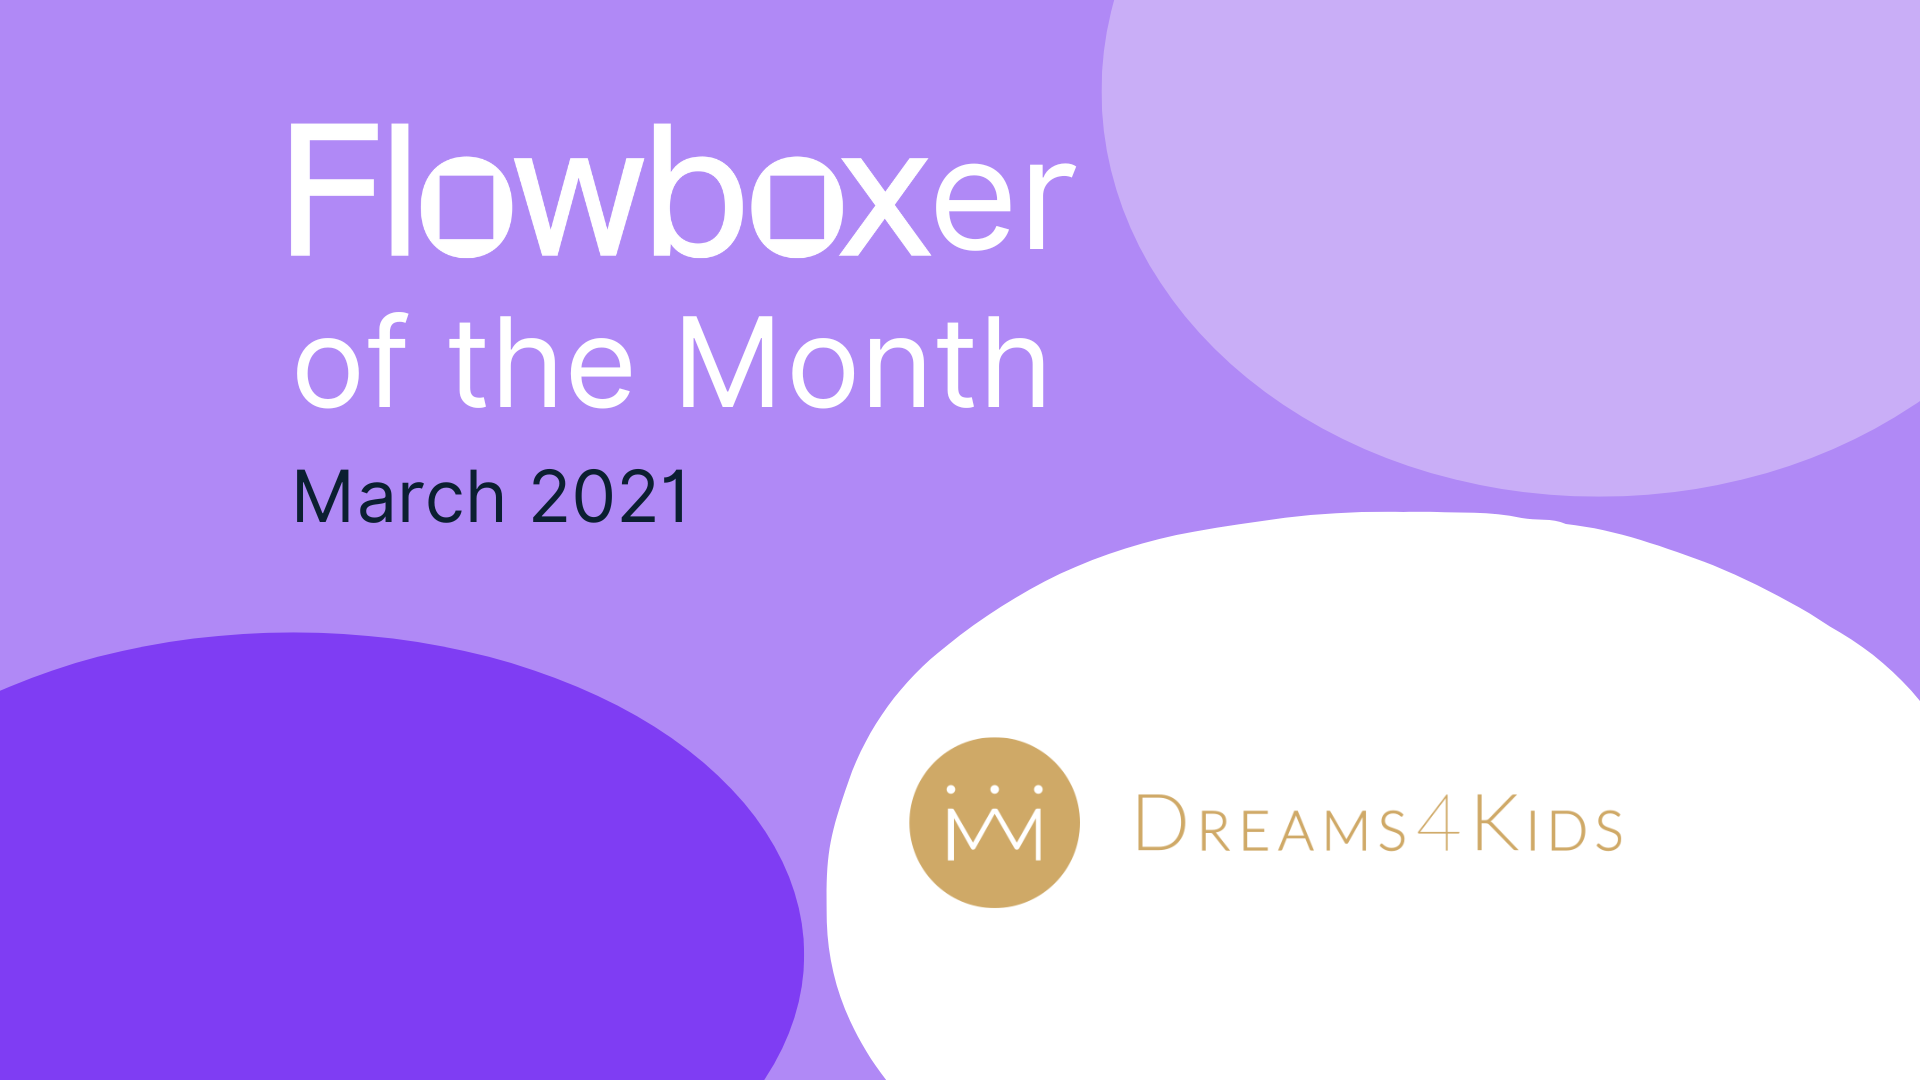 Flowboxer of the month – March 2022: Dreams4Kids